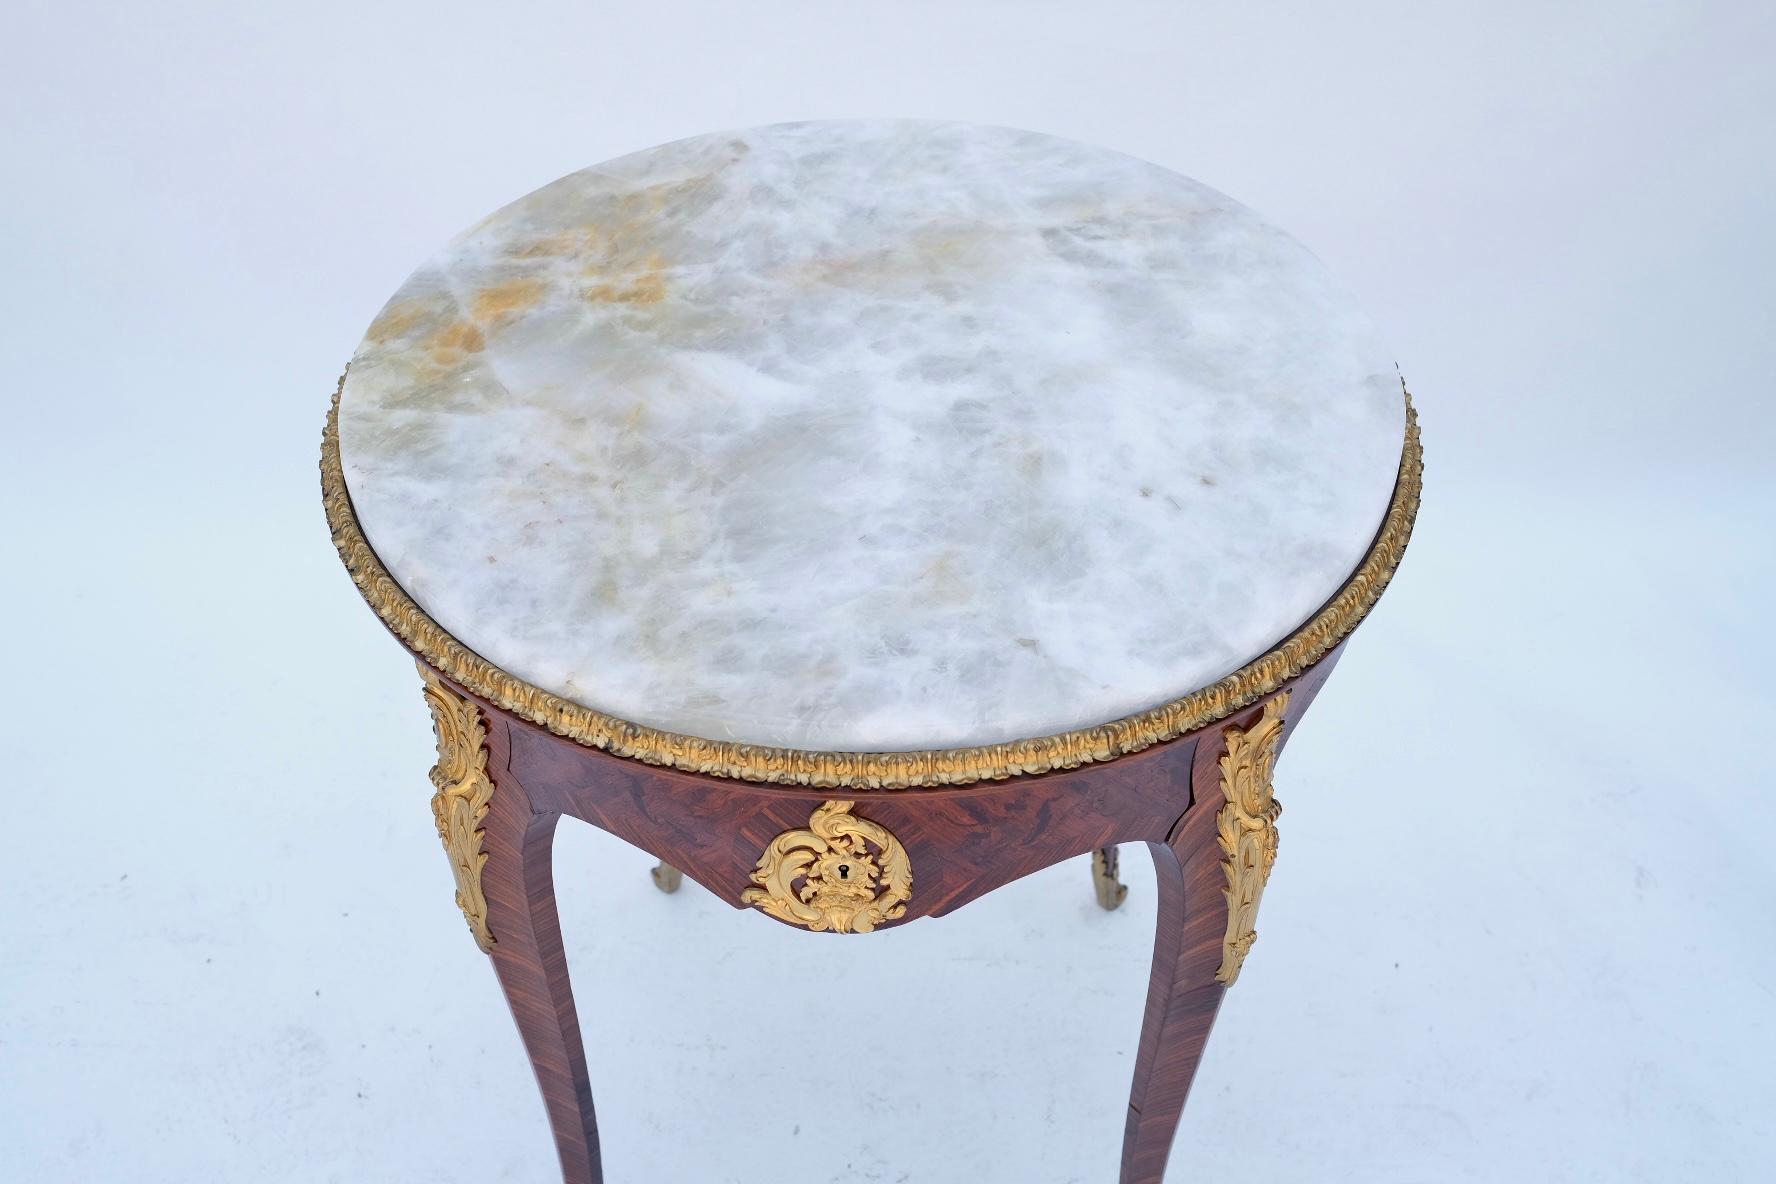 Fine 19th Century. French. Bronze-mounted. Single drawer. Rock crystal stone top. Chasing on the bronze is very fine. Cannot find signature.